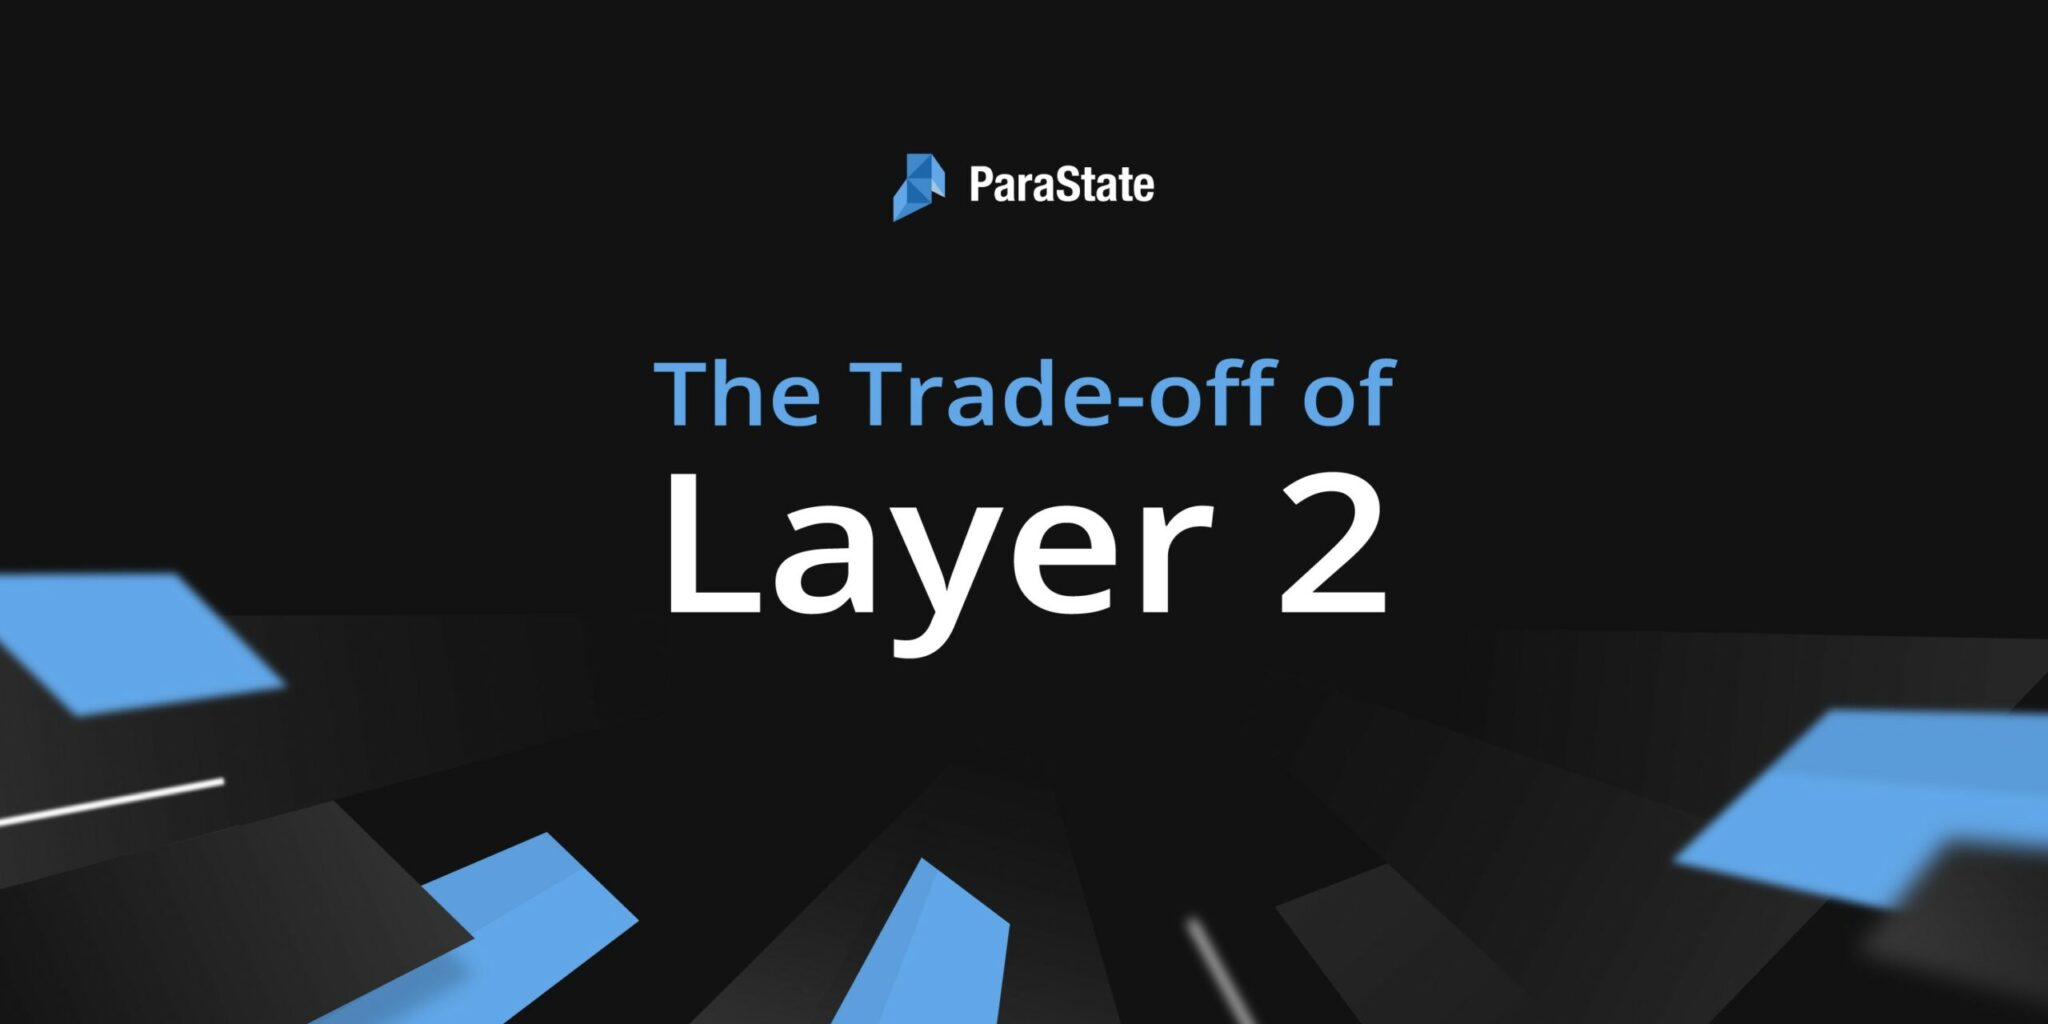 ParaState intends to make all blockchains Ethereum-compatible